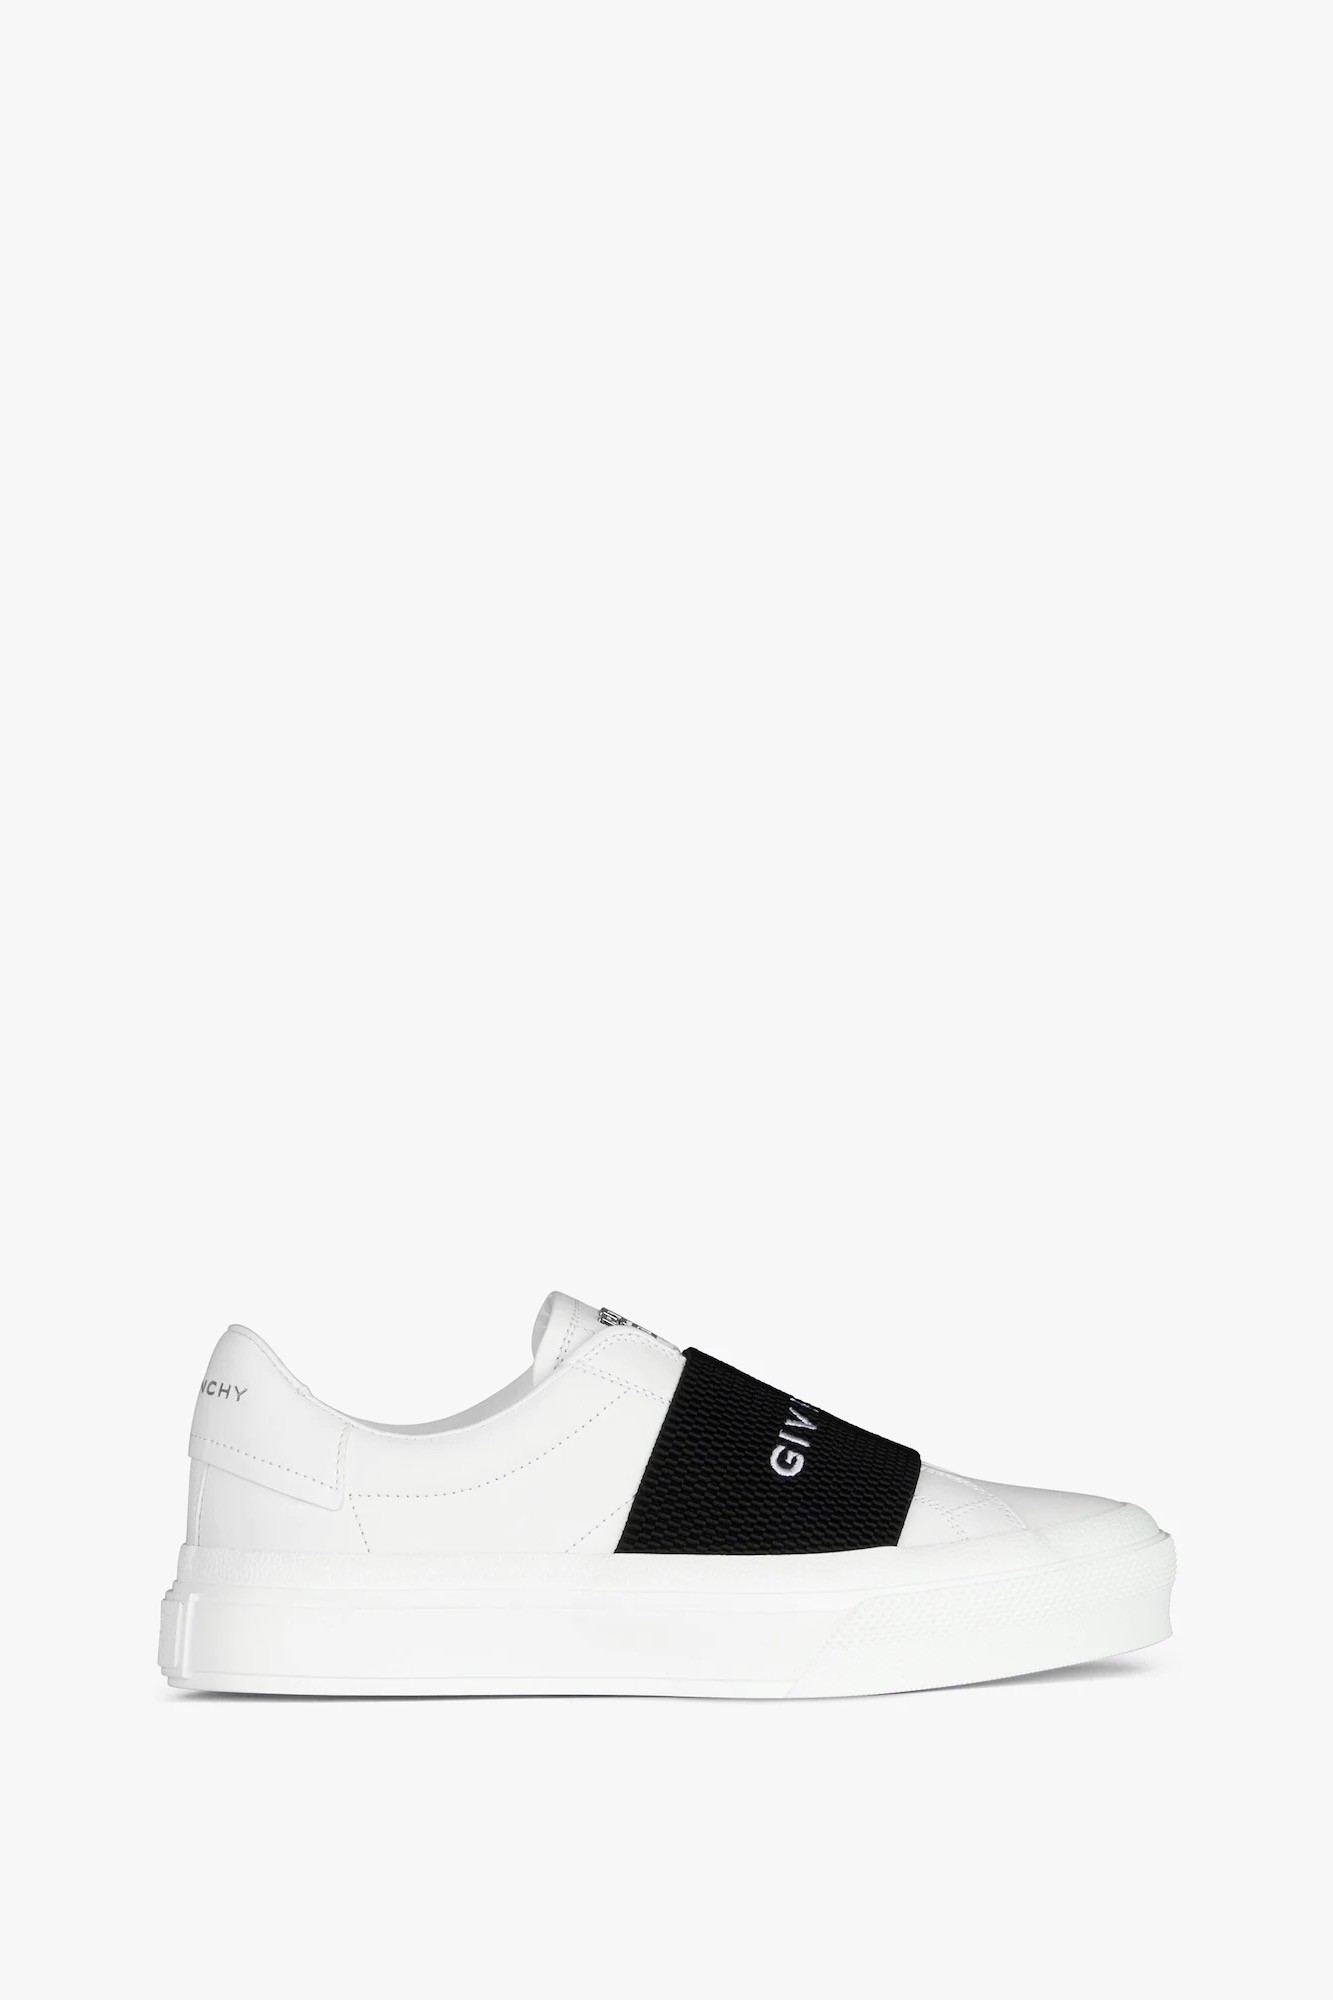 Givenchy - Sneakers In Leather With GIVENCHY Strap - white/black